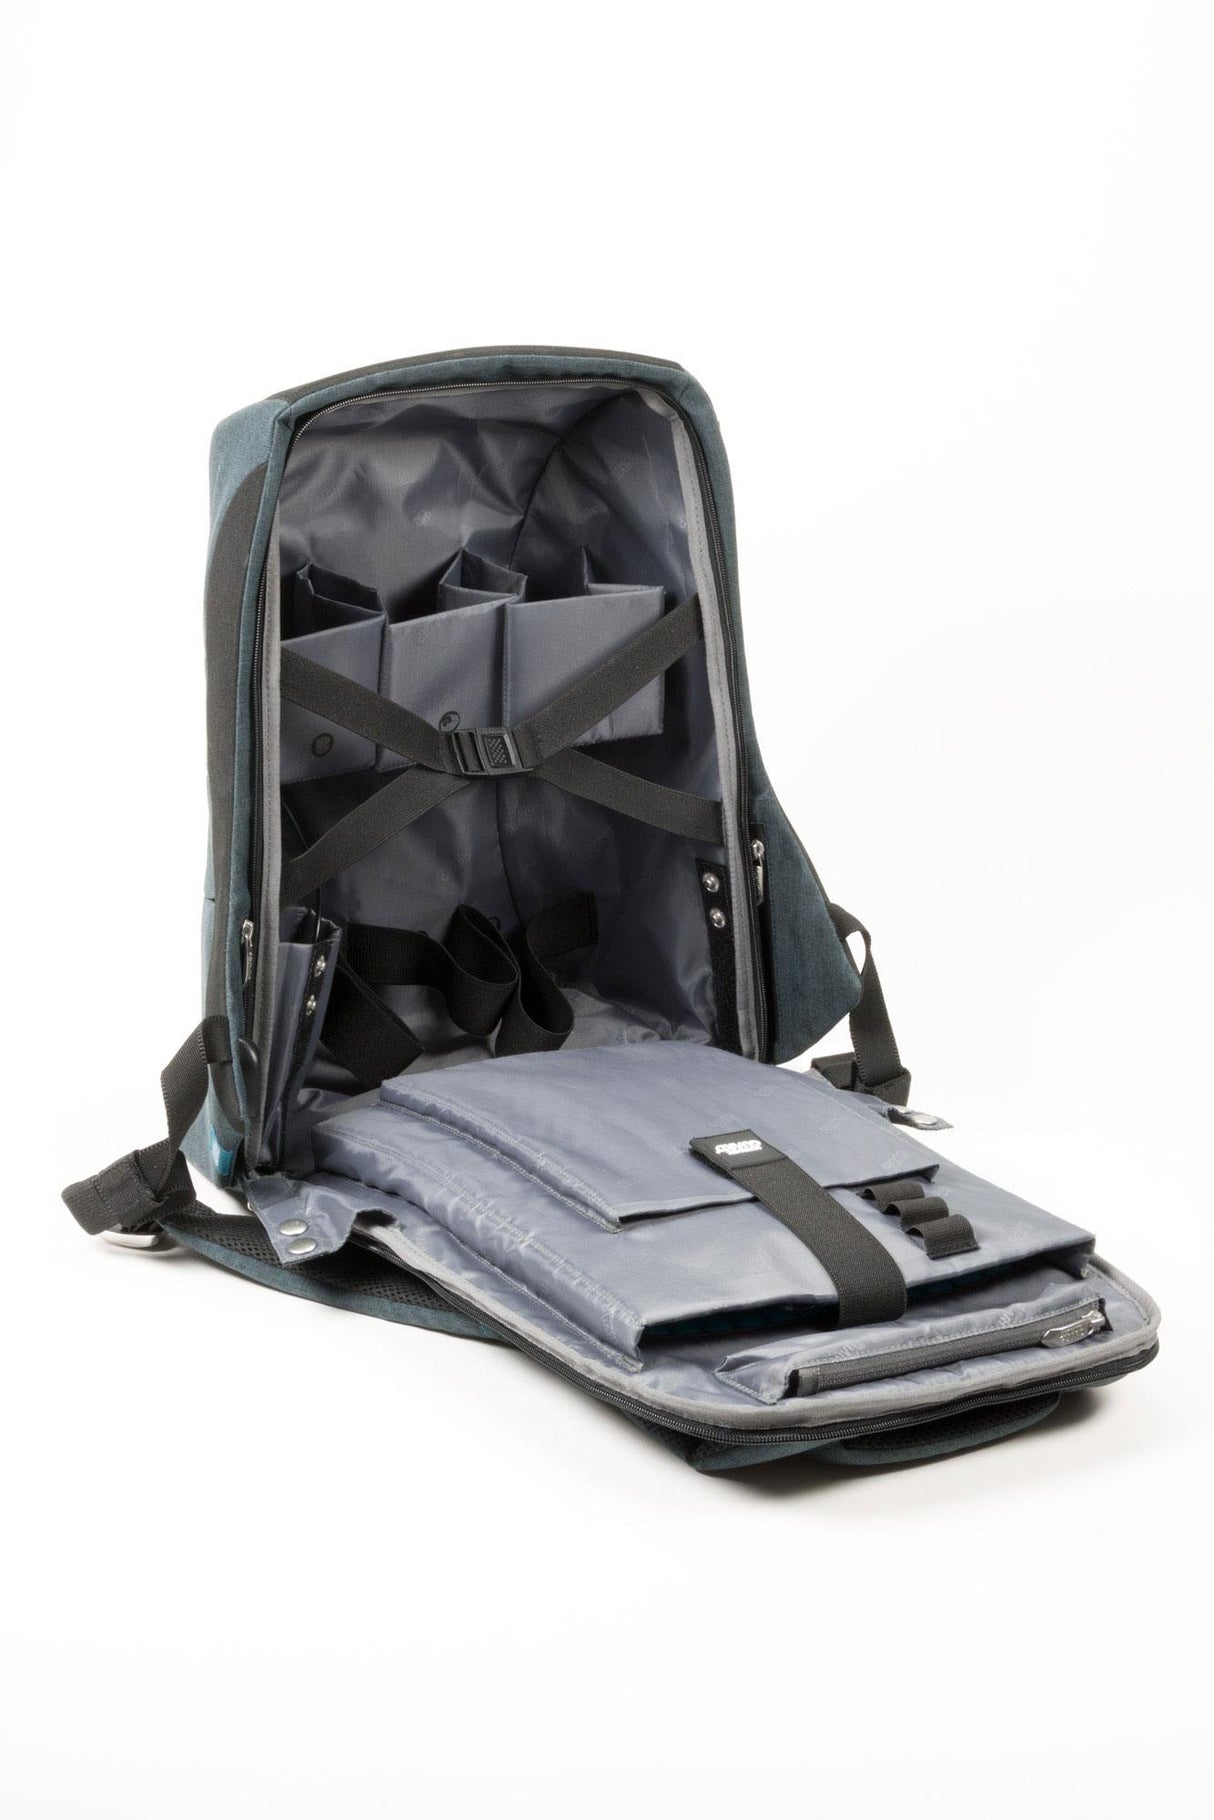 Ultimate Guard: Anti-Theft Backpack - Ammonite